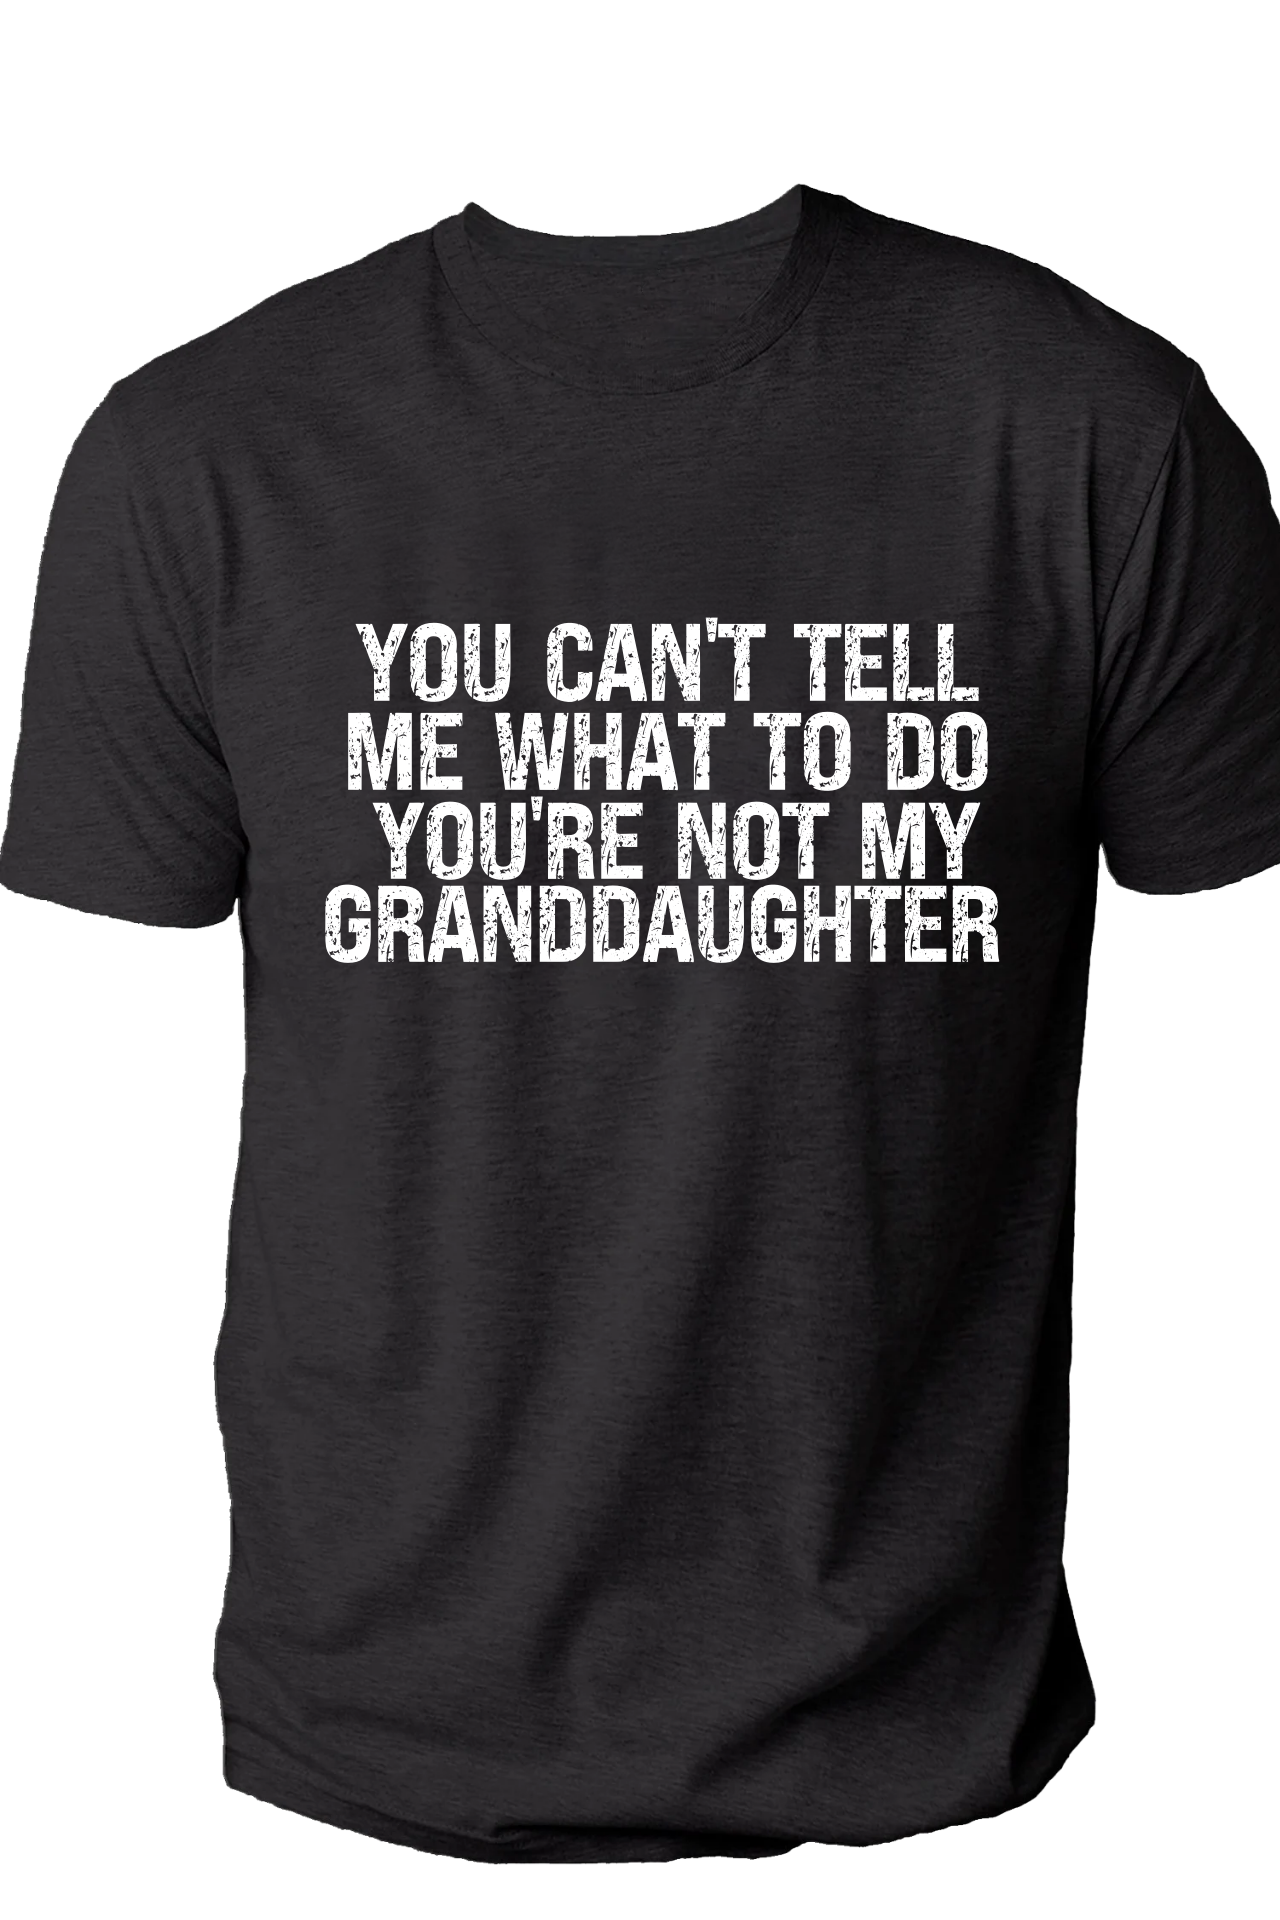 You can't tell me what to do, you're not my granddaughter tshirt